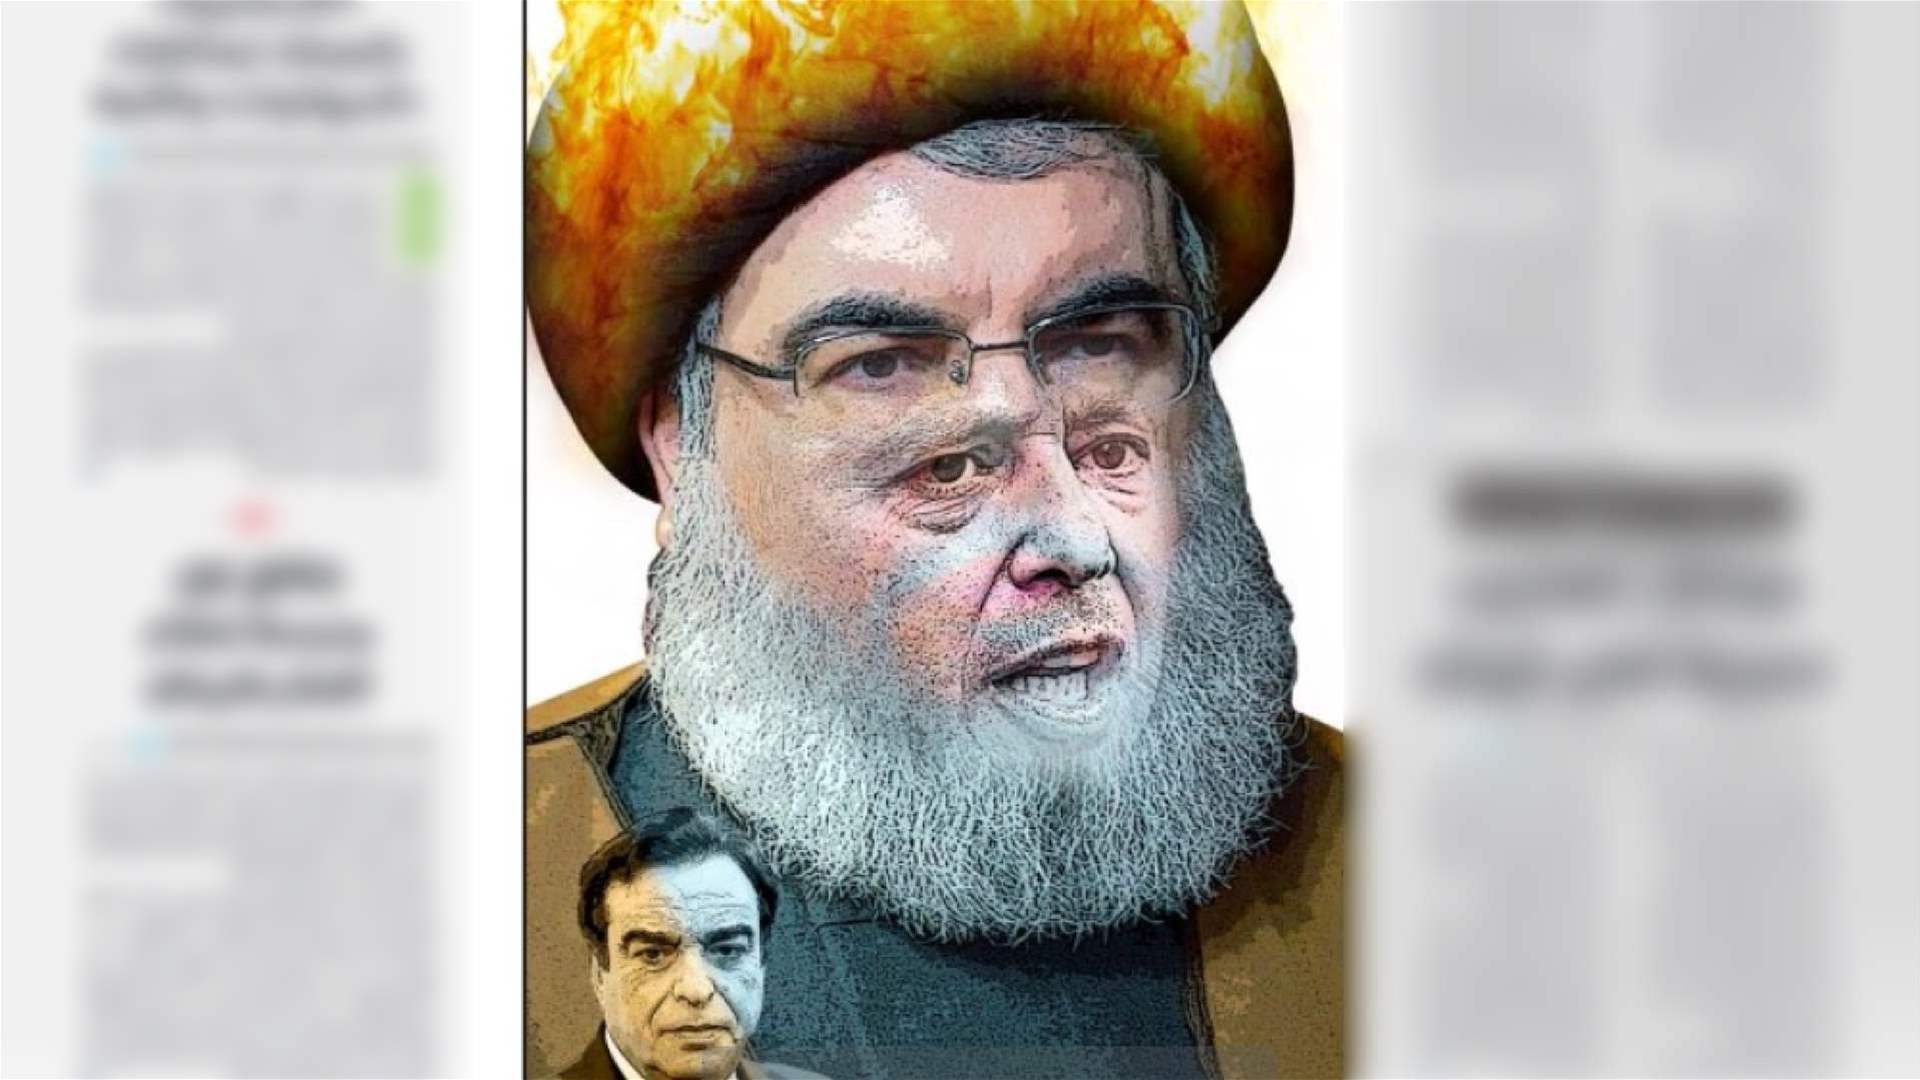 Saudi newspaper Okaz features controversial image, headlines of Nasrallah, Frangieh following presidential candidacy